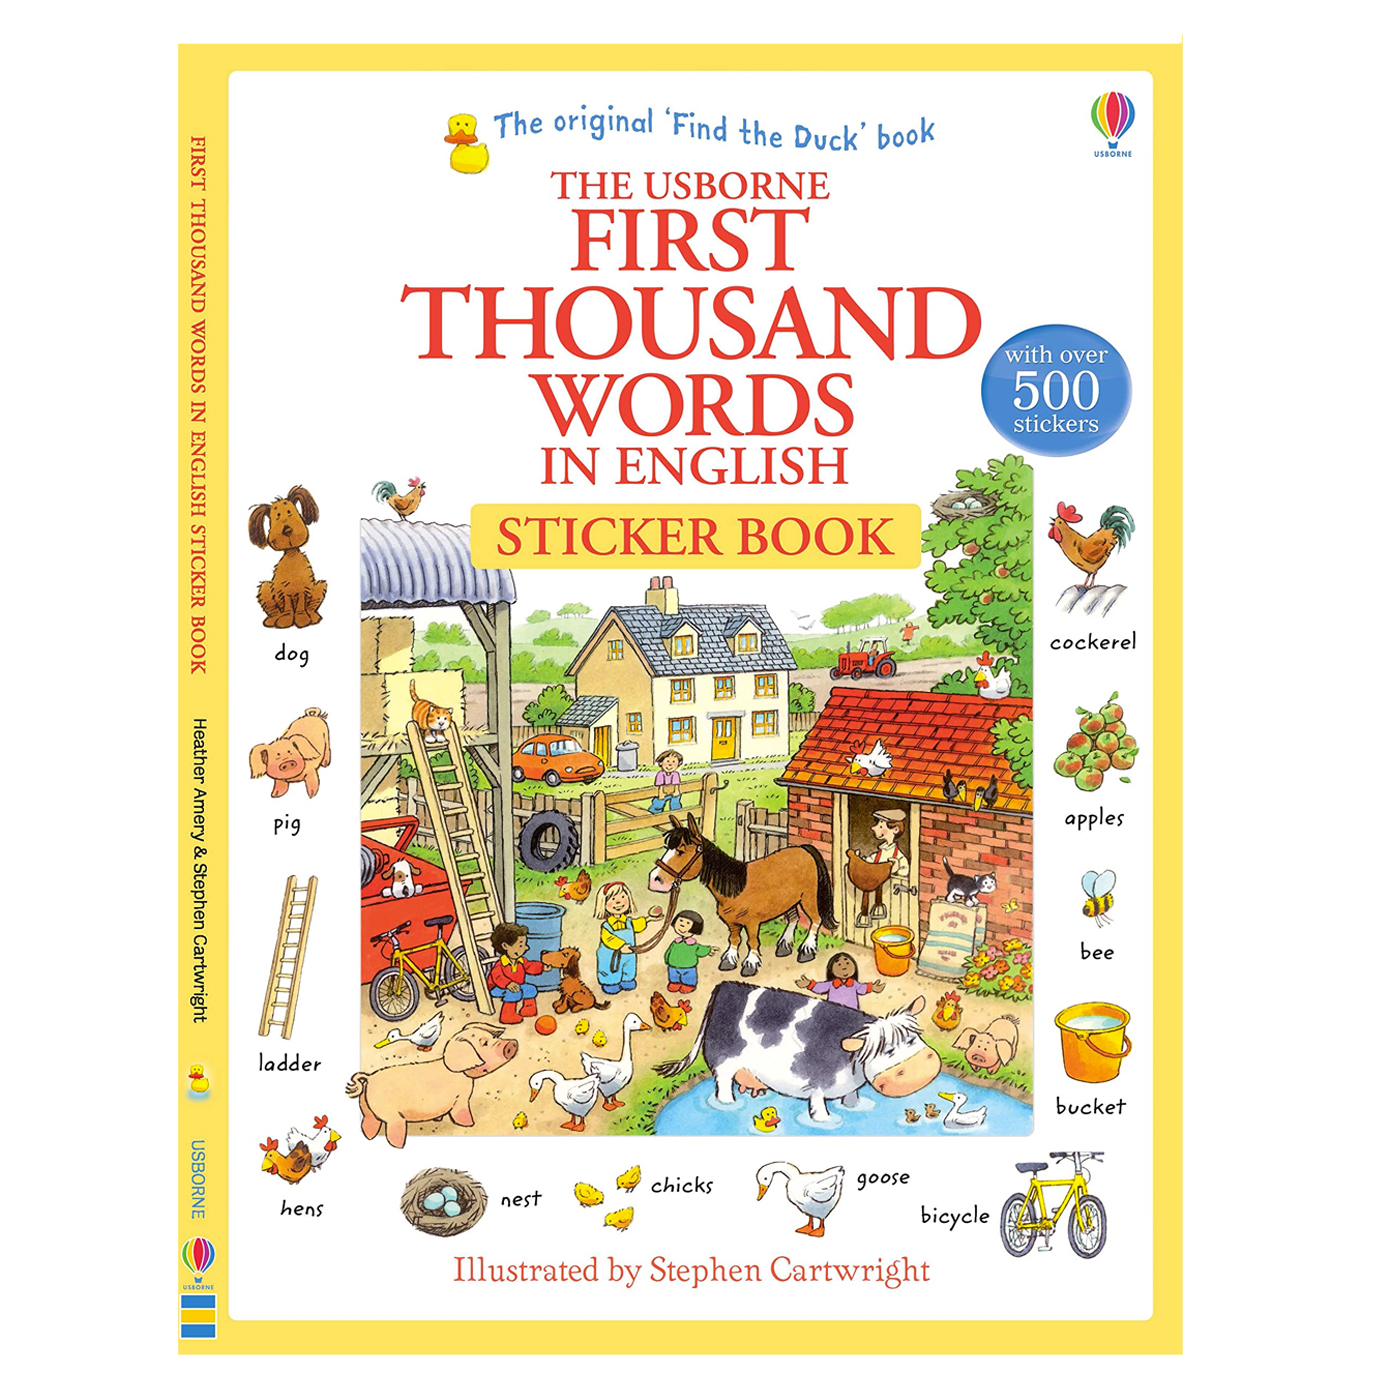  First Thousand Words in English Sticker Book